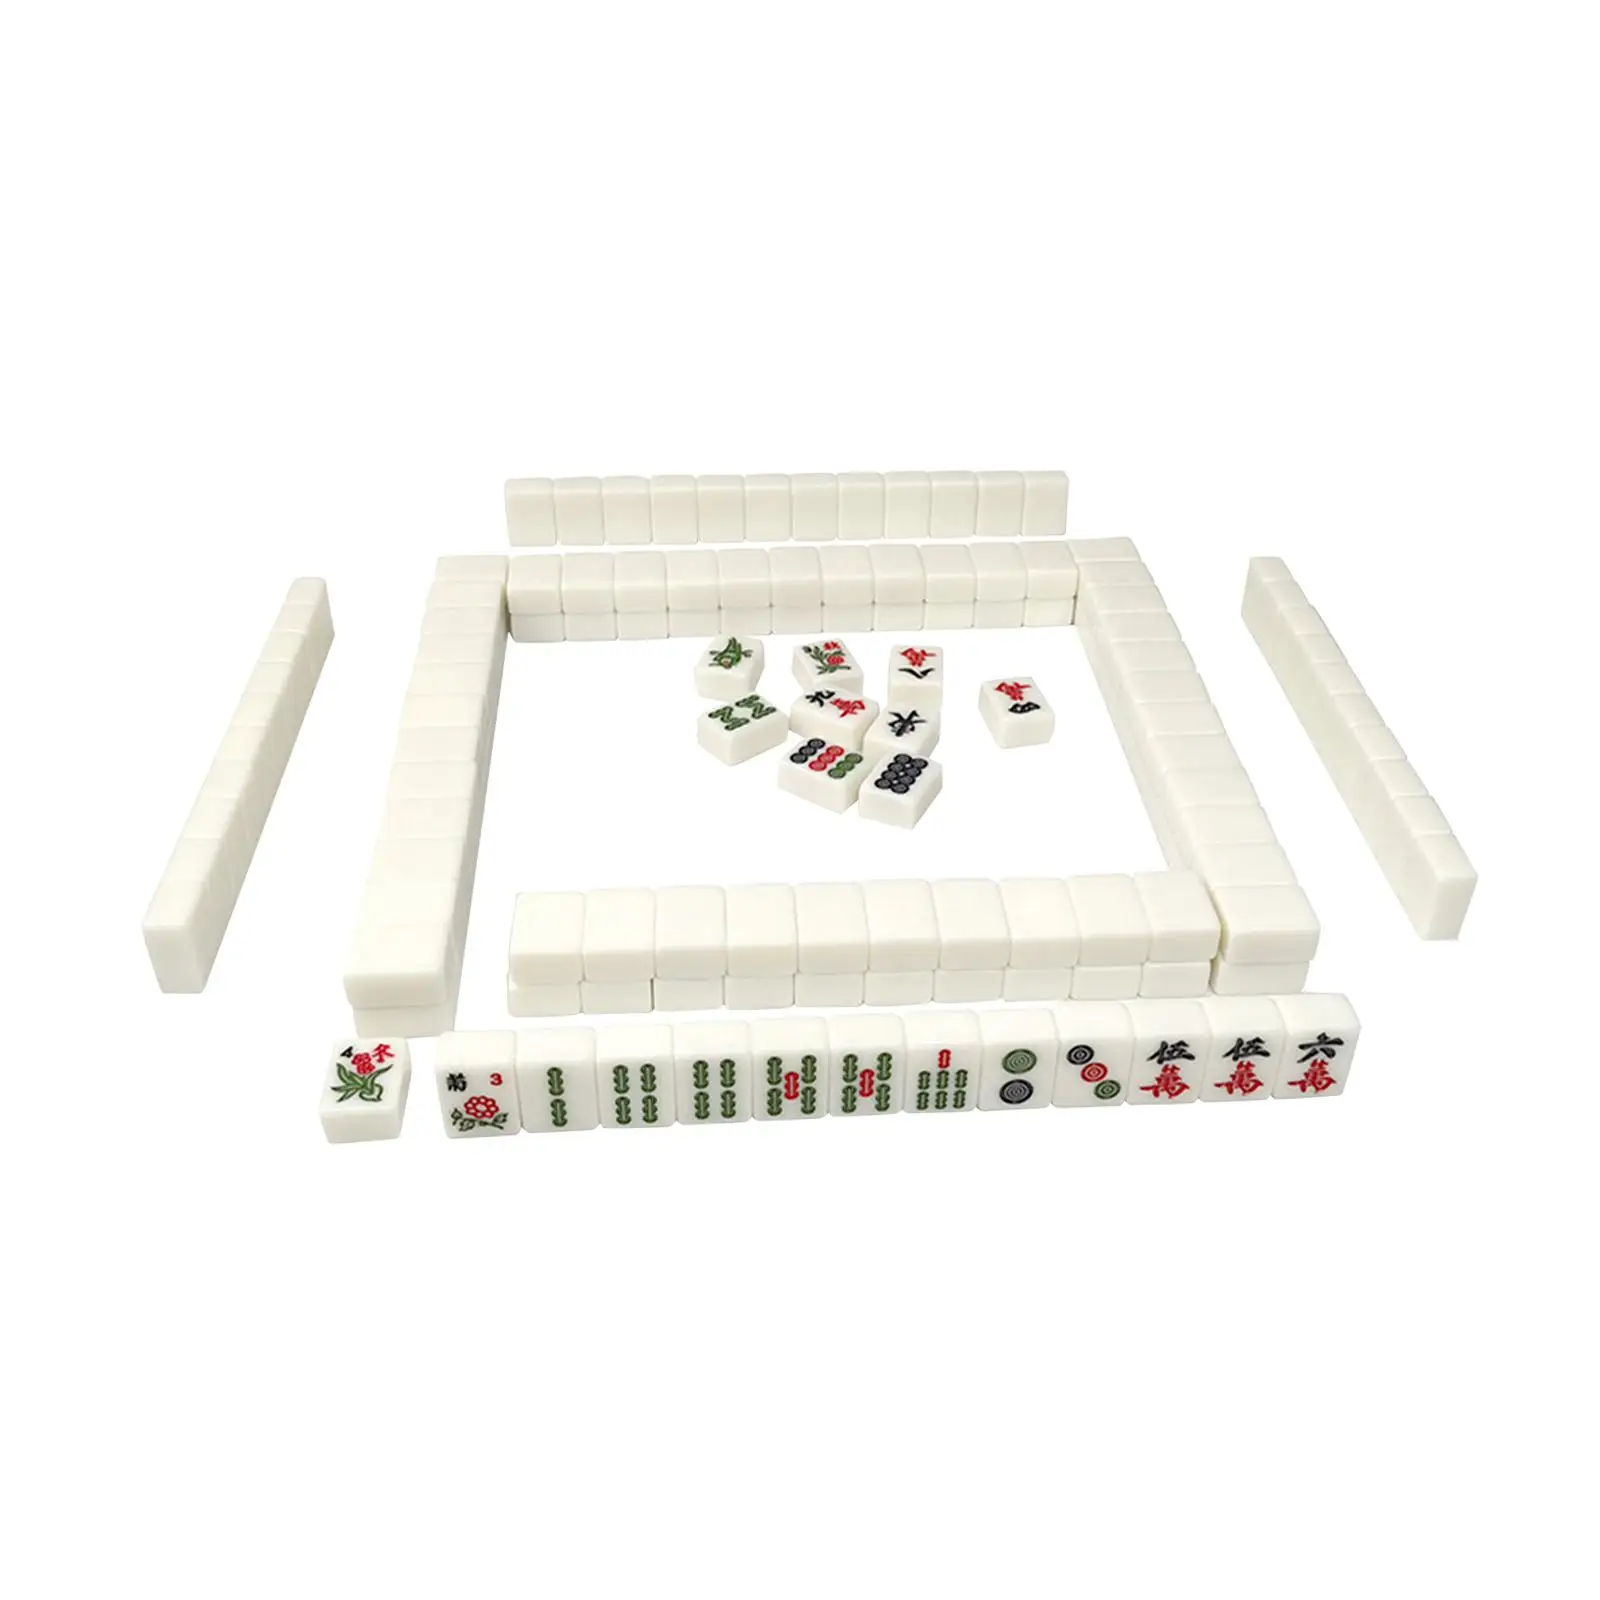 144x Mini Mahjong Tiles Chinese Game Play Traditional Chinese Version Game Set Portable for Home Travel Apartment Dormitory Kids